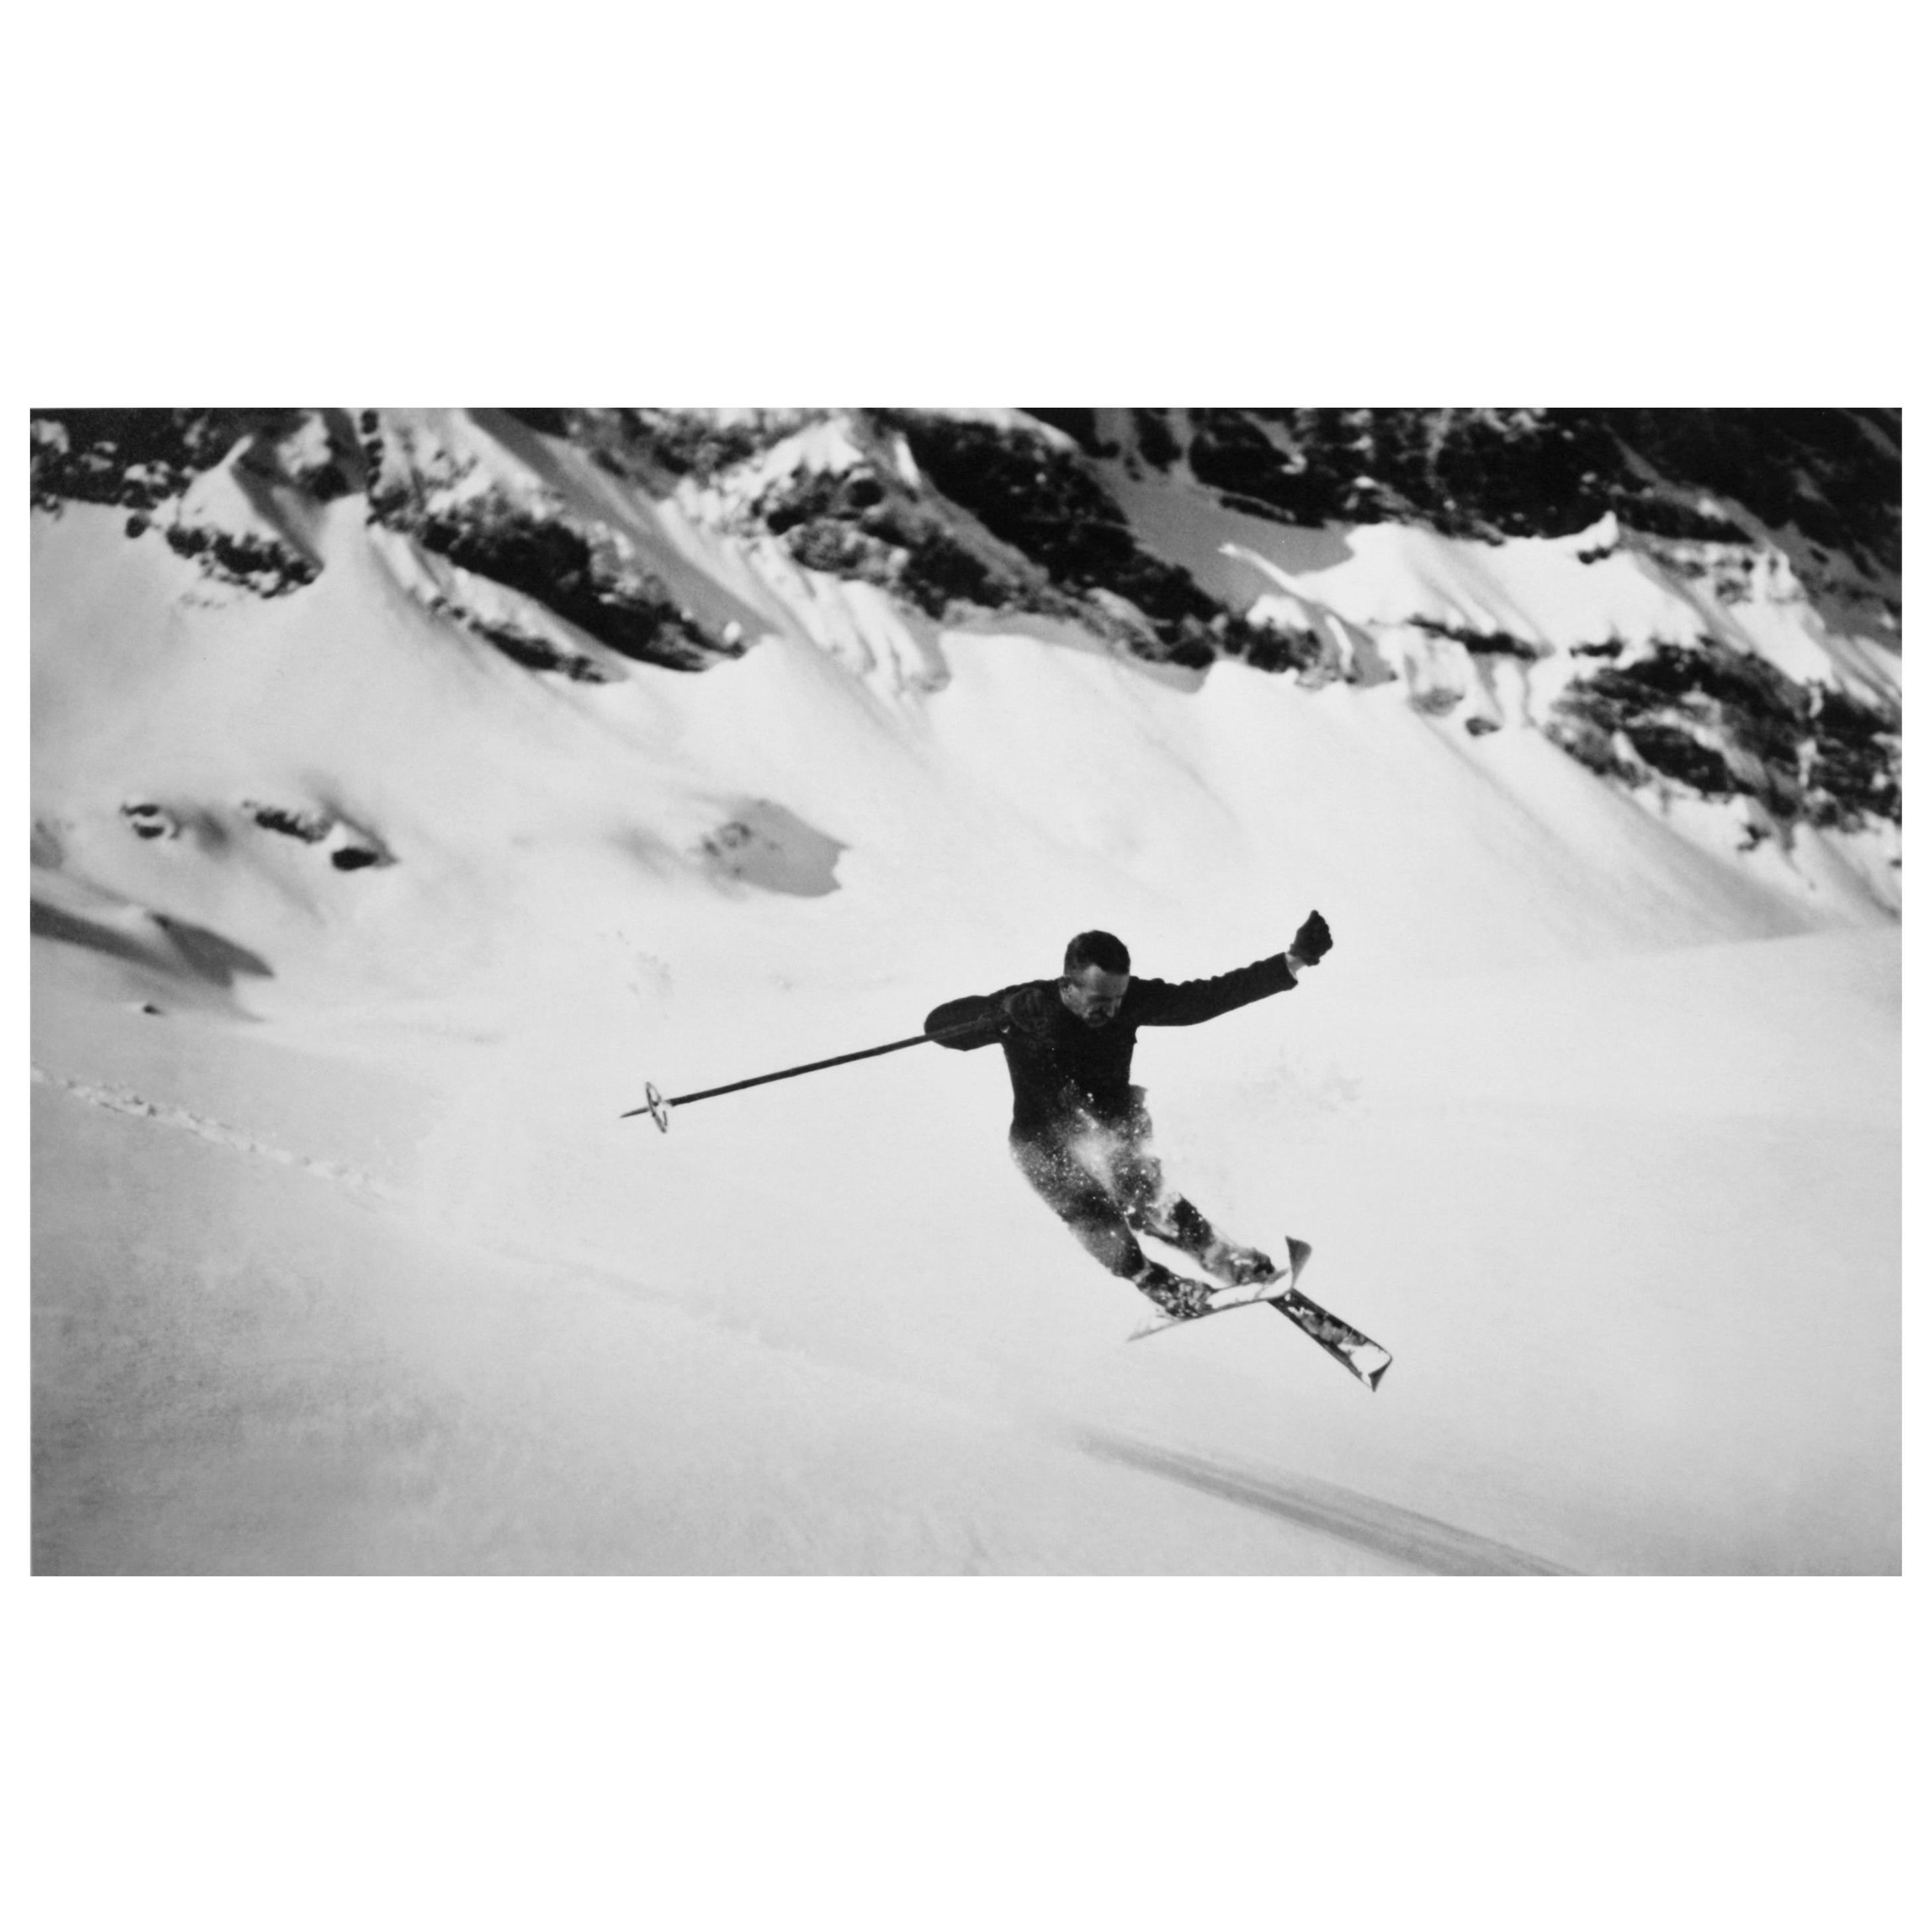 Ski Photography, Quersprung, Alpine Ski Photograph, Image from the 1930s